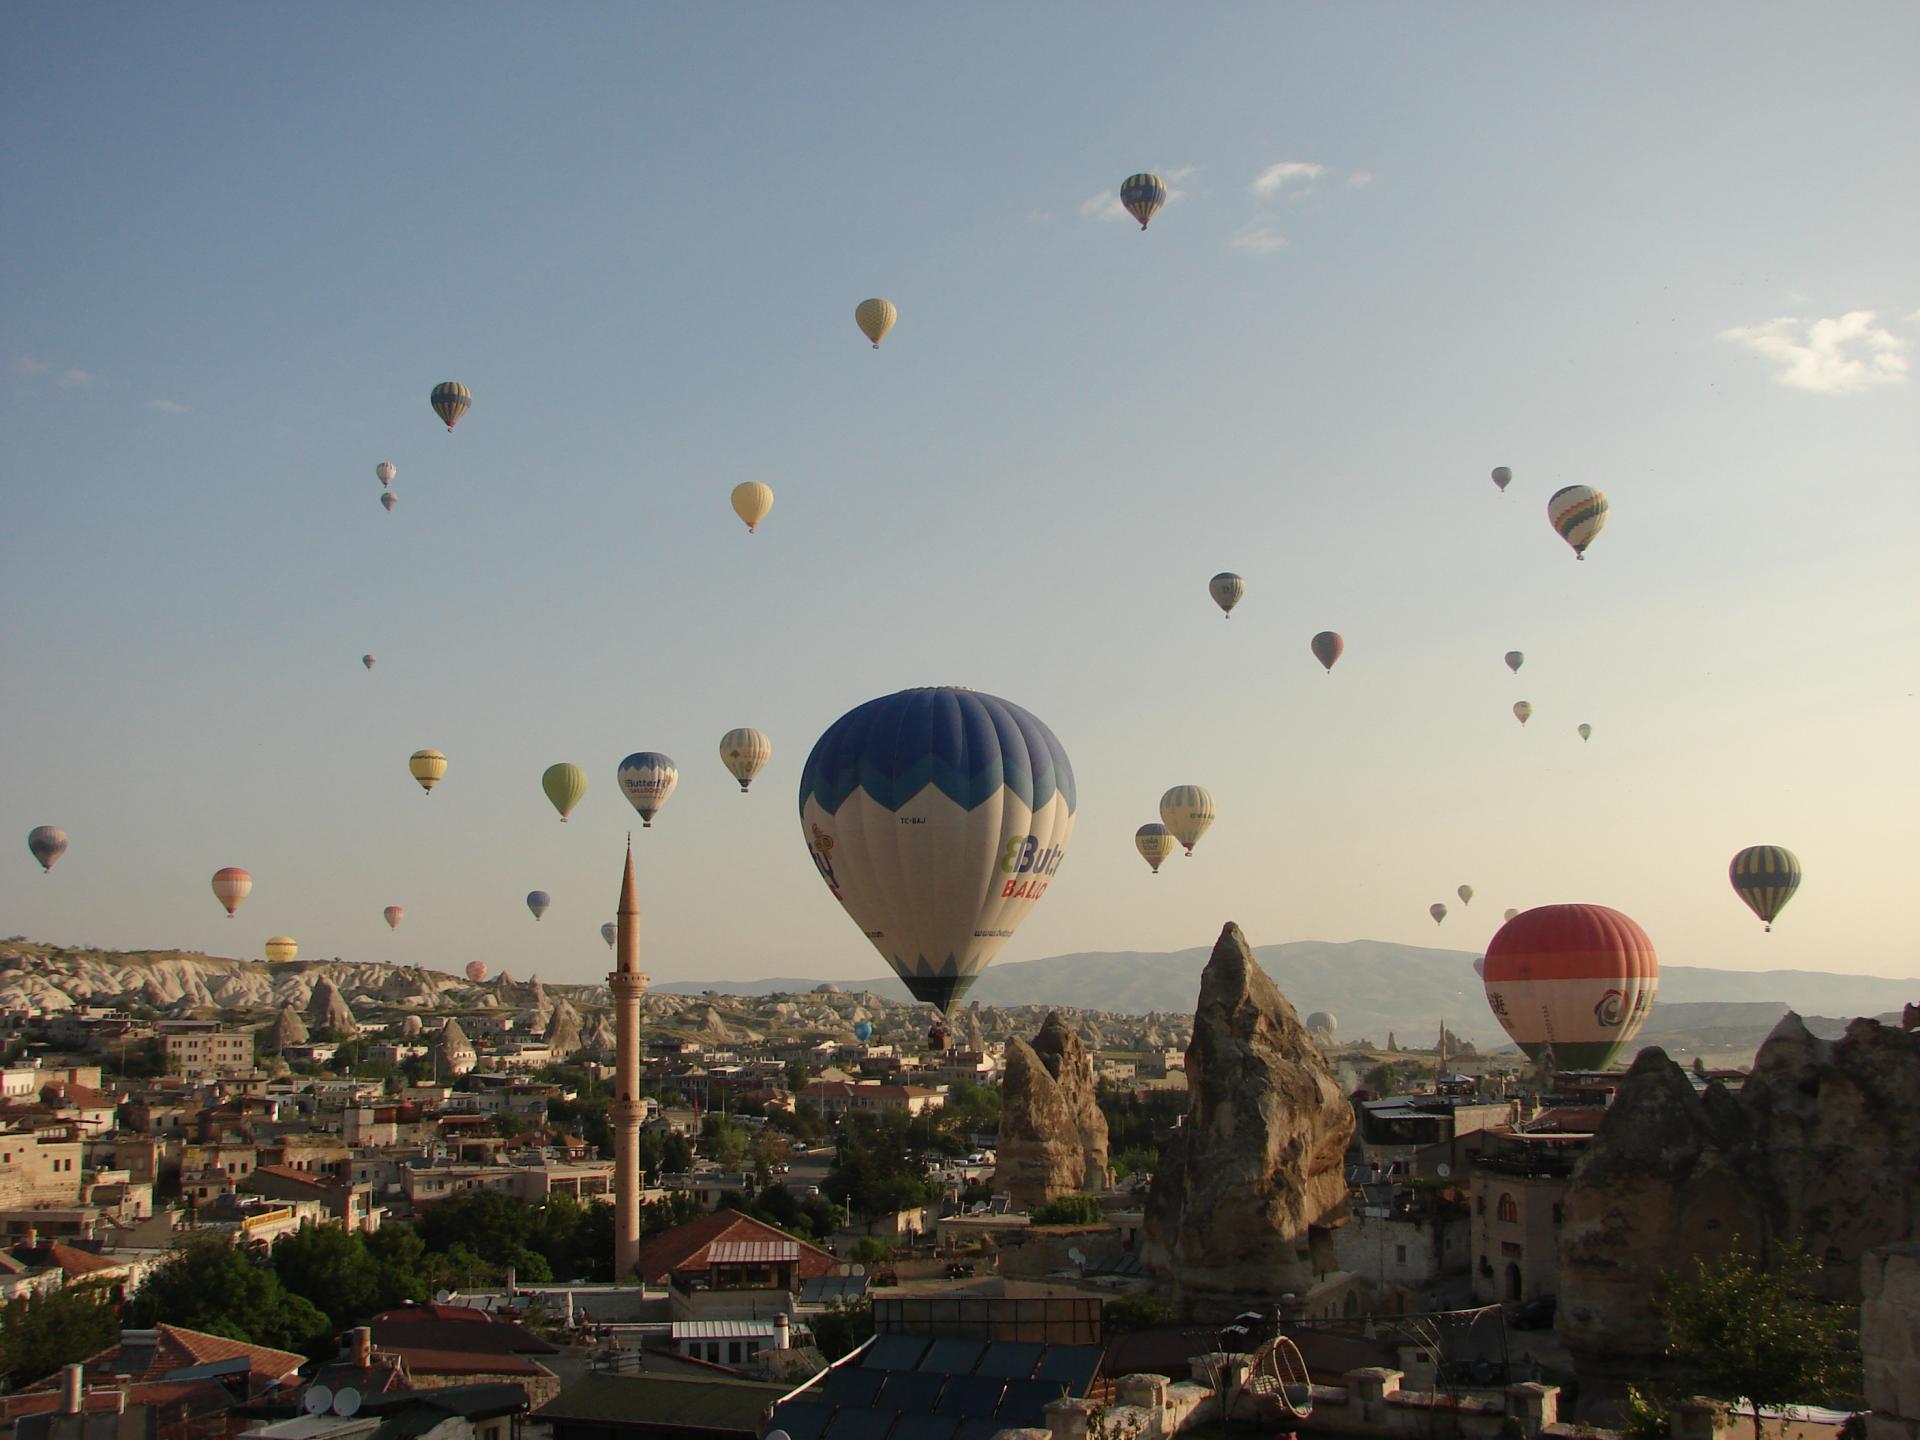 Cappadocia (Turkey) - a magical country! - Top Sights of the World